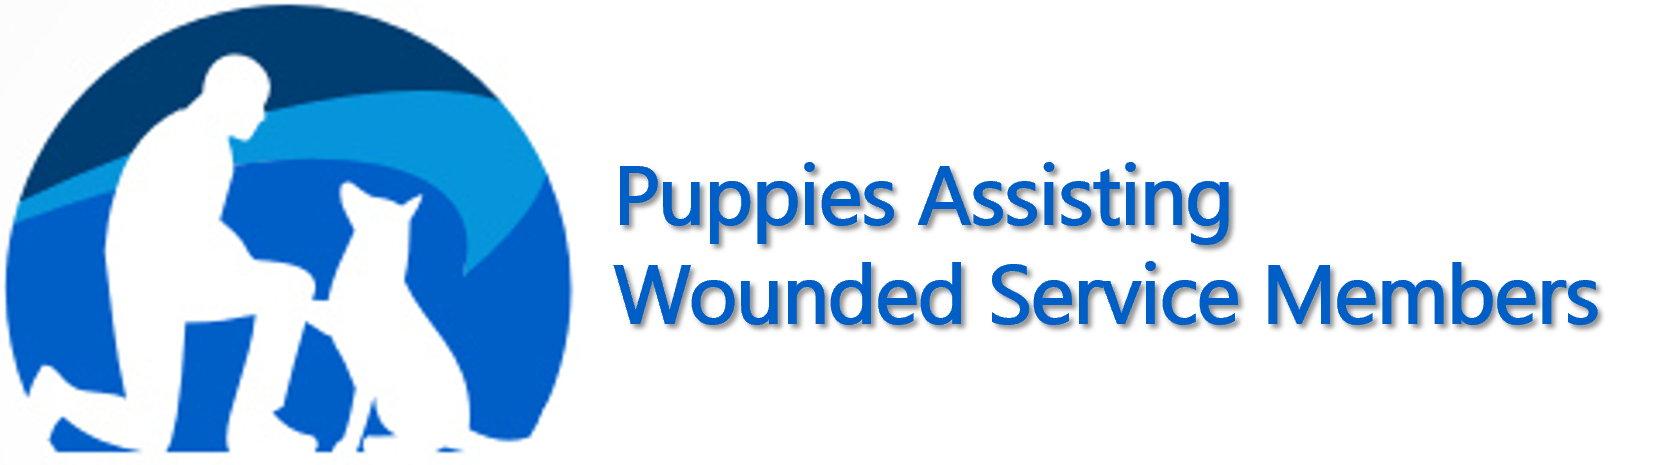 Puppies Assisting Wounded Servicemembers